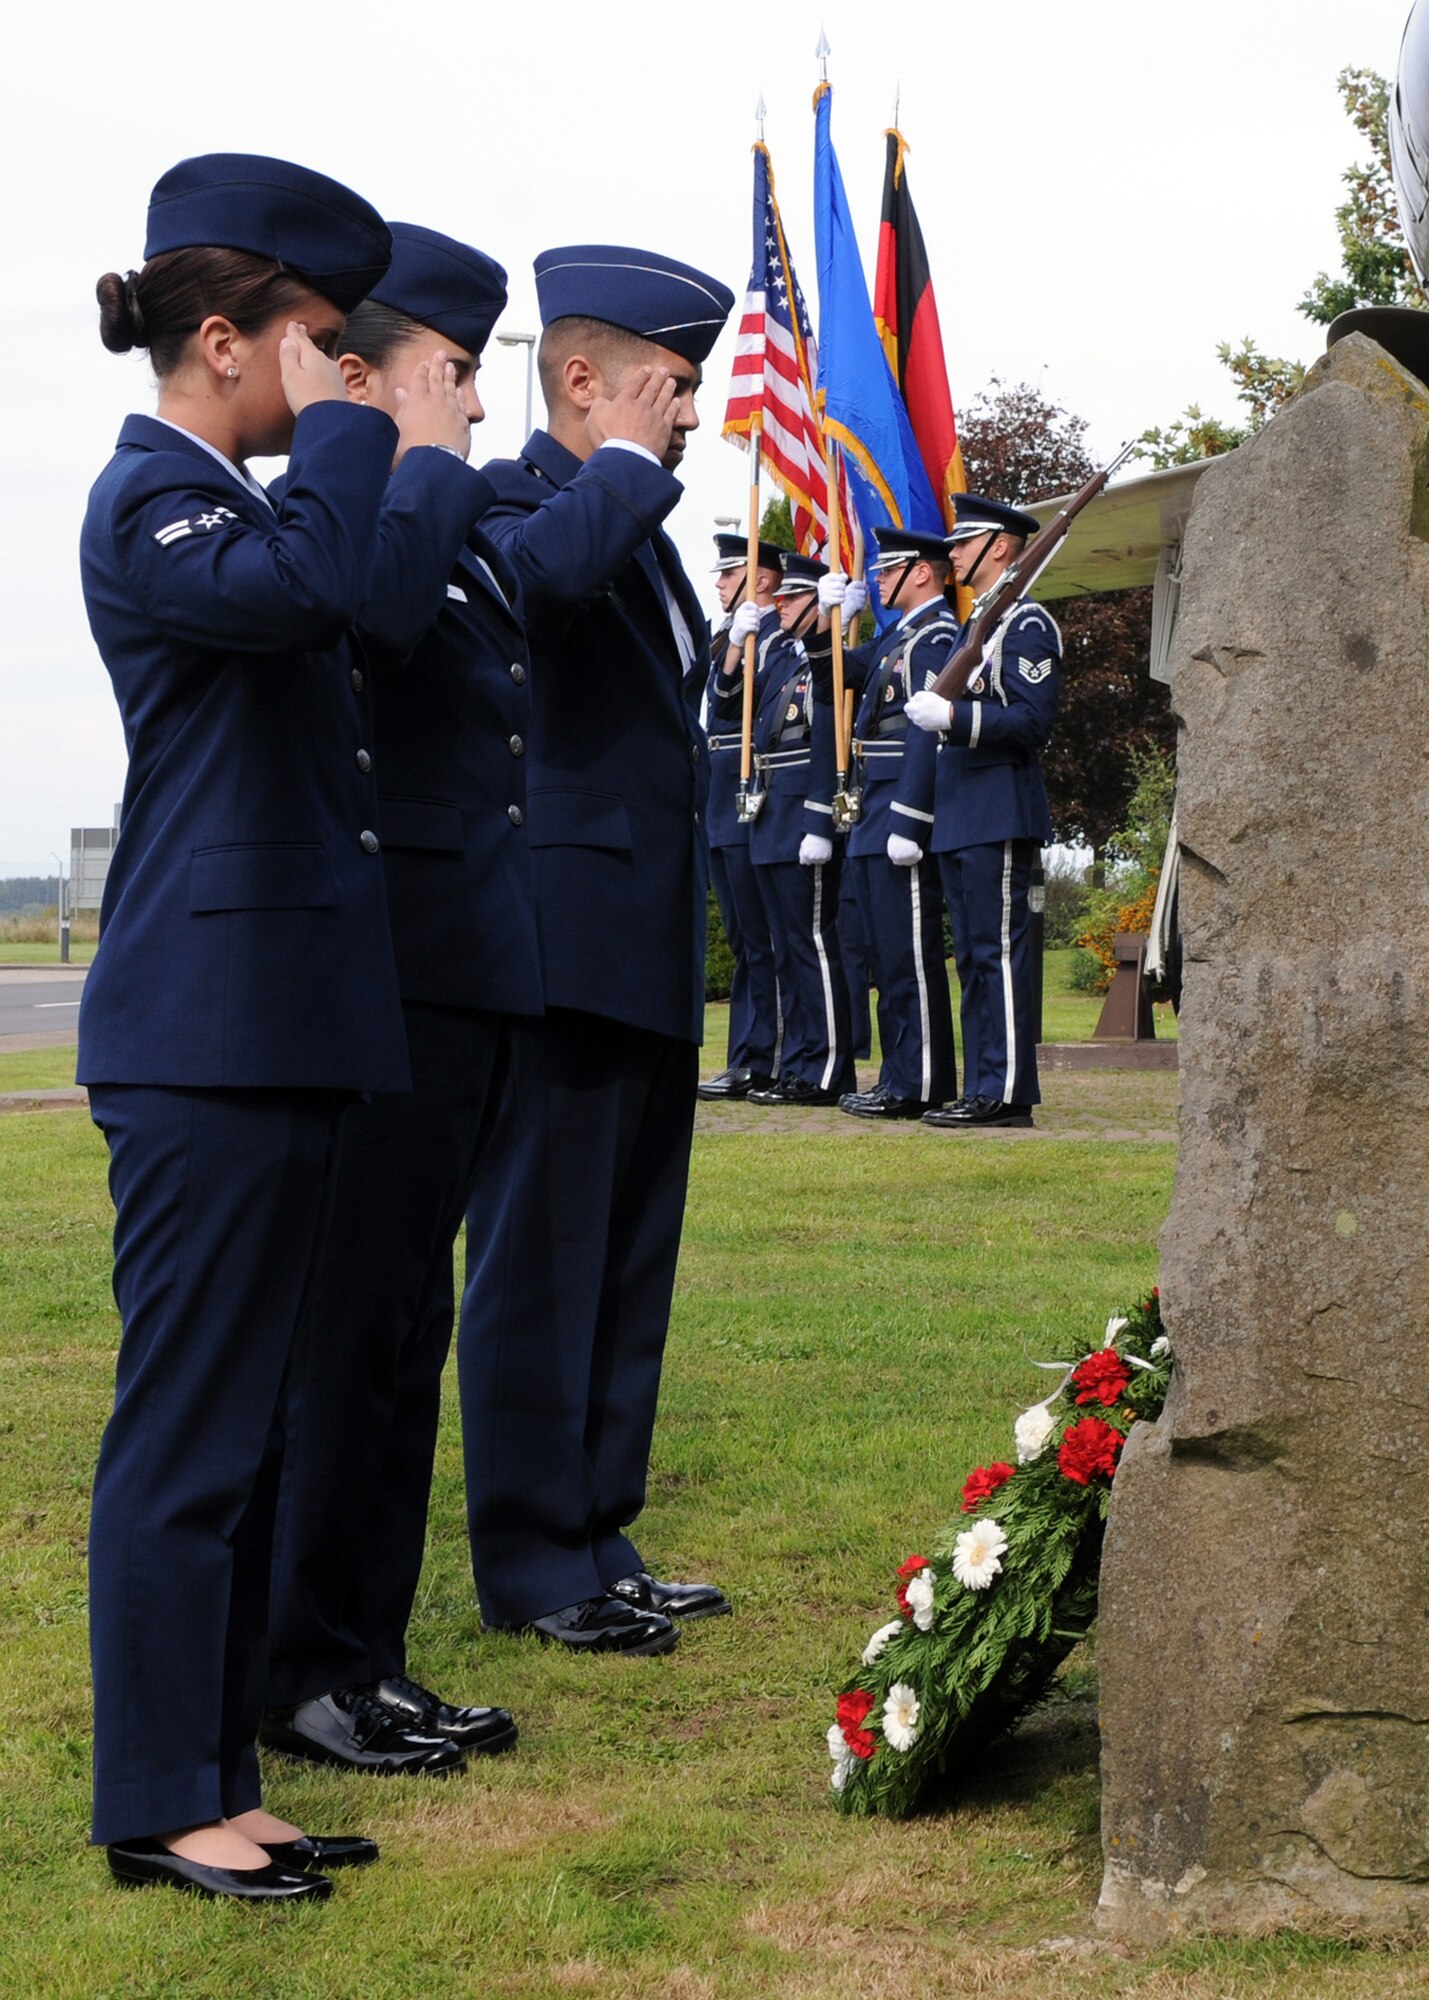 SPANGDAHLEM AIR BASE, Germany – Members of the 52nd Fighter Wing salute after laying a wreath at the POW/MIA memorial during the ceremony at the air park here Sept. 16. The ceremony is held every year to remember those who have served and been taken prisoner or have been listed as missing in action. (U.S. Air Force photo/Senior Airman Christopher Toon) 